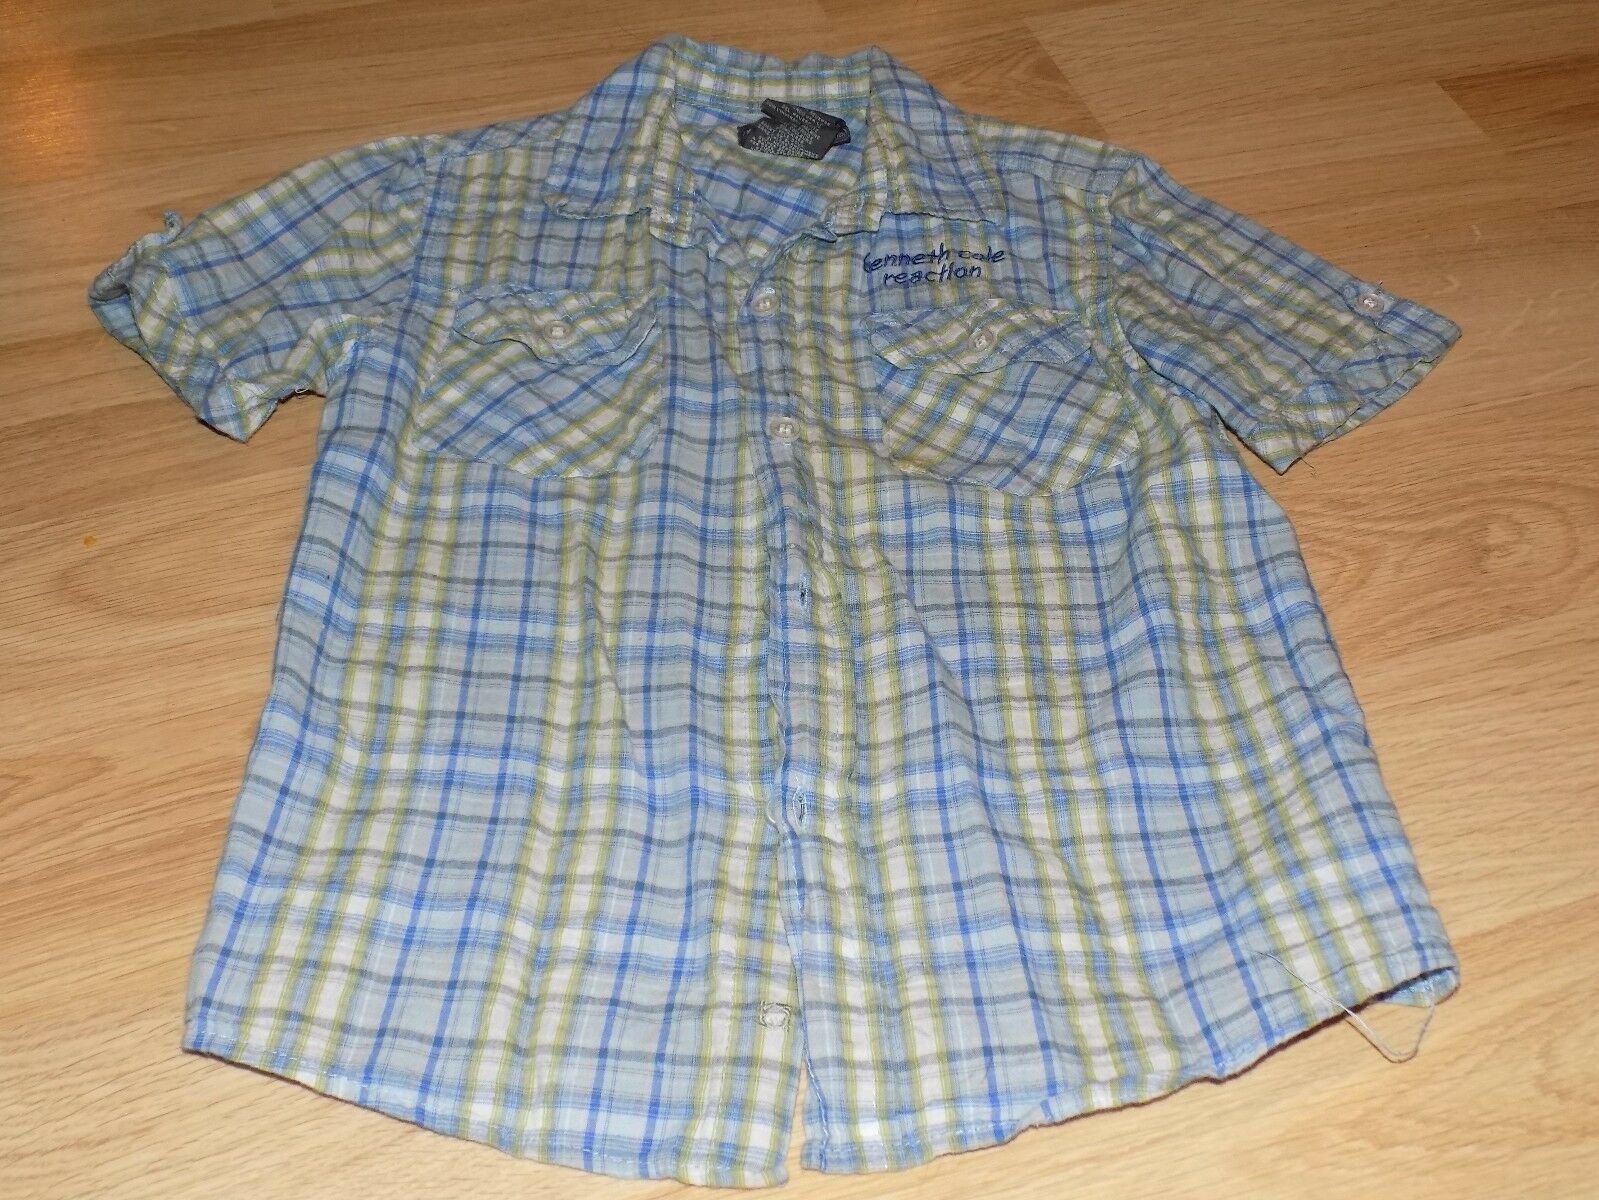 Boy's Size 5 Kenneth Cole Reaction Blue Plaid Gingham Button Up Shirt Peace Sign - $10.00